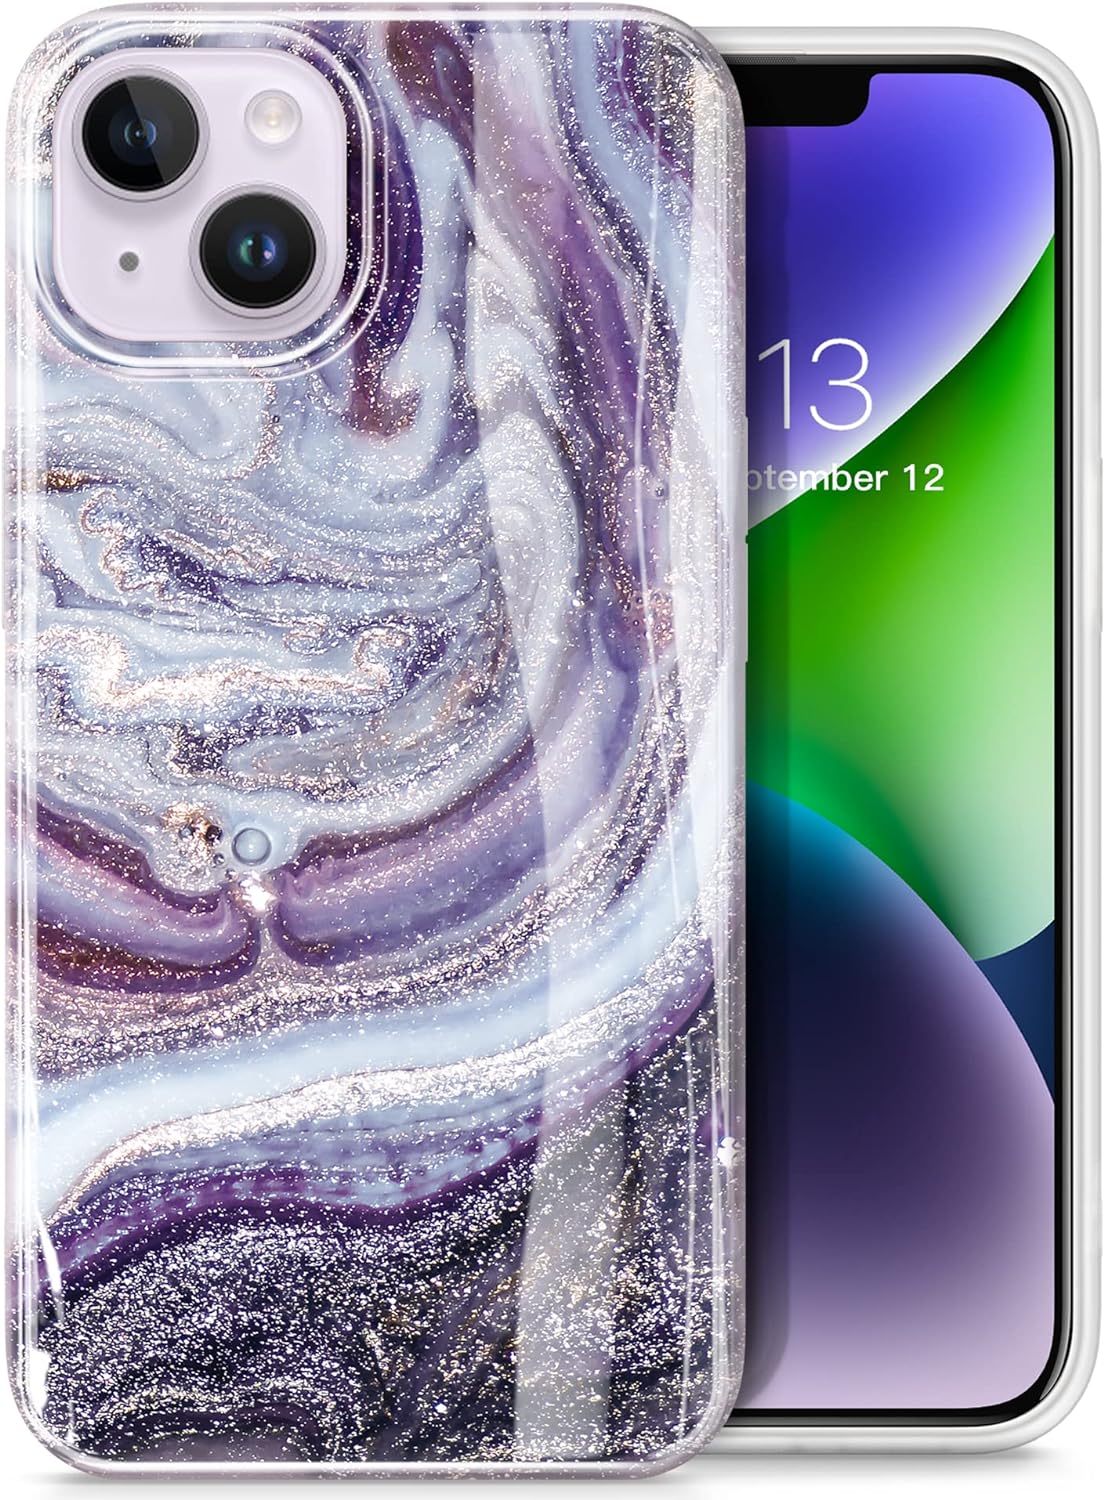 I get more compliments on this phone case than anything else. Its sleek and beautiful. I'm not gentle with my phone - in fact, as a mom of 4, I drop it often. This case protects my phone with every drop. Very happy with its beauty and durability.